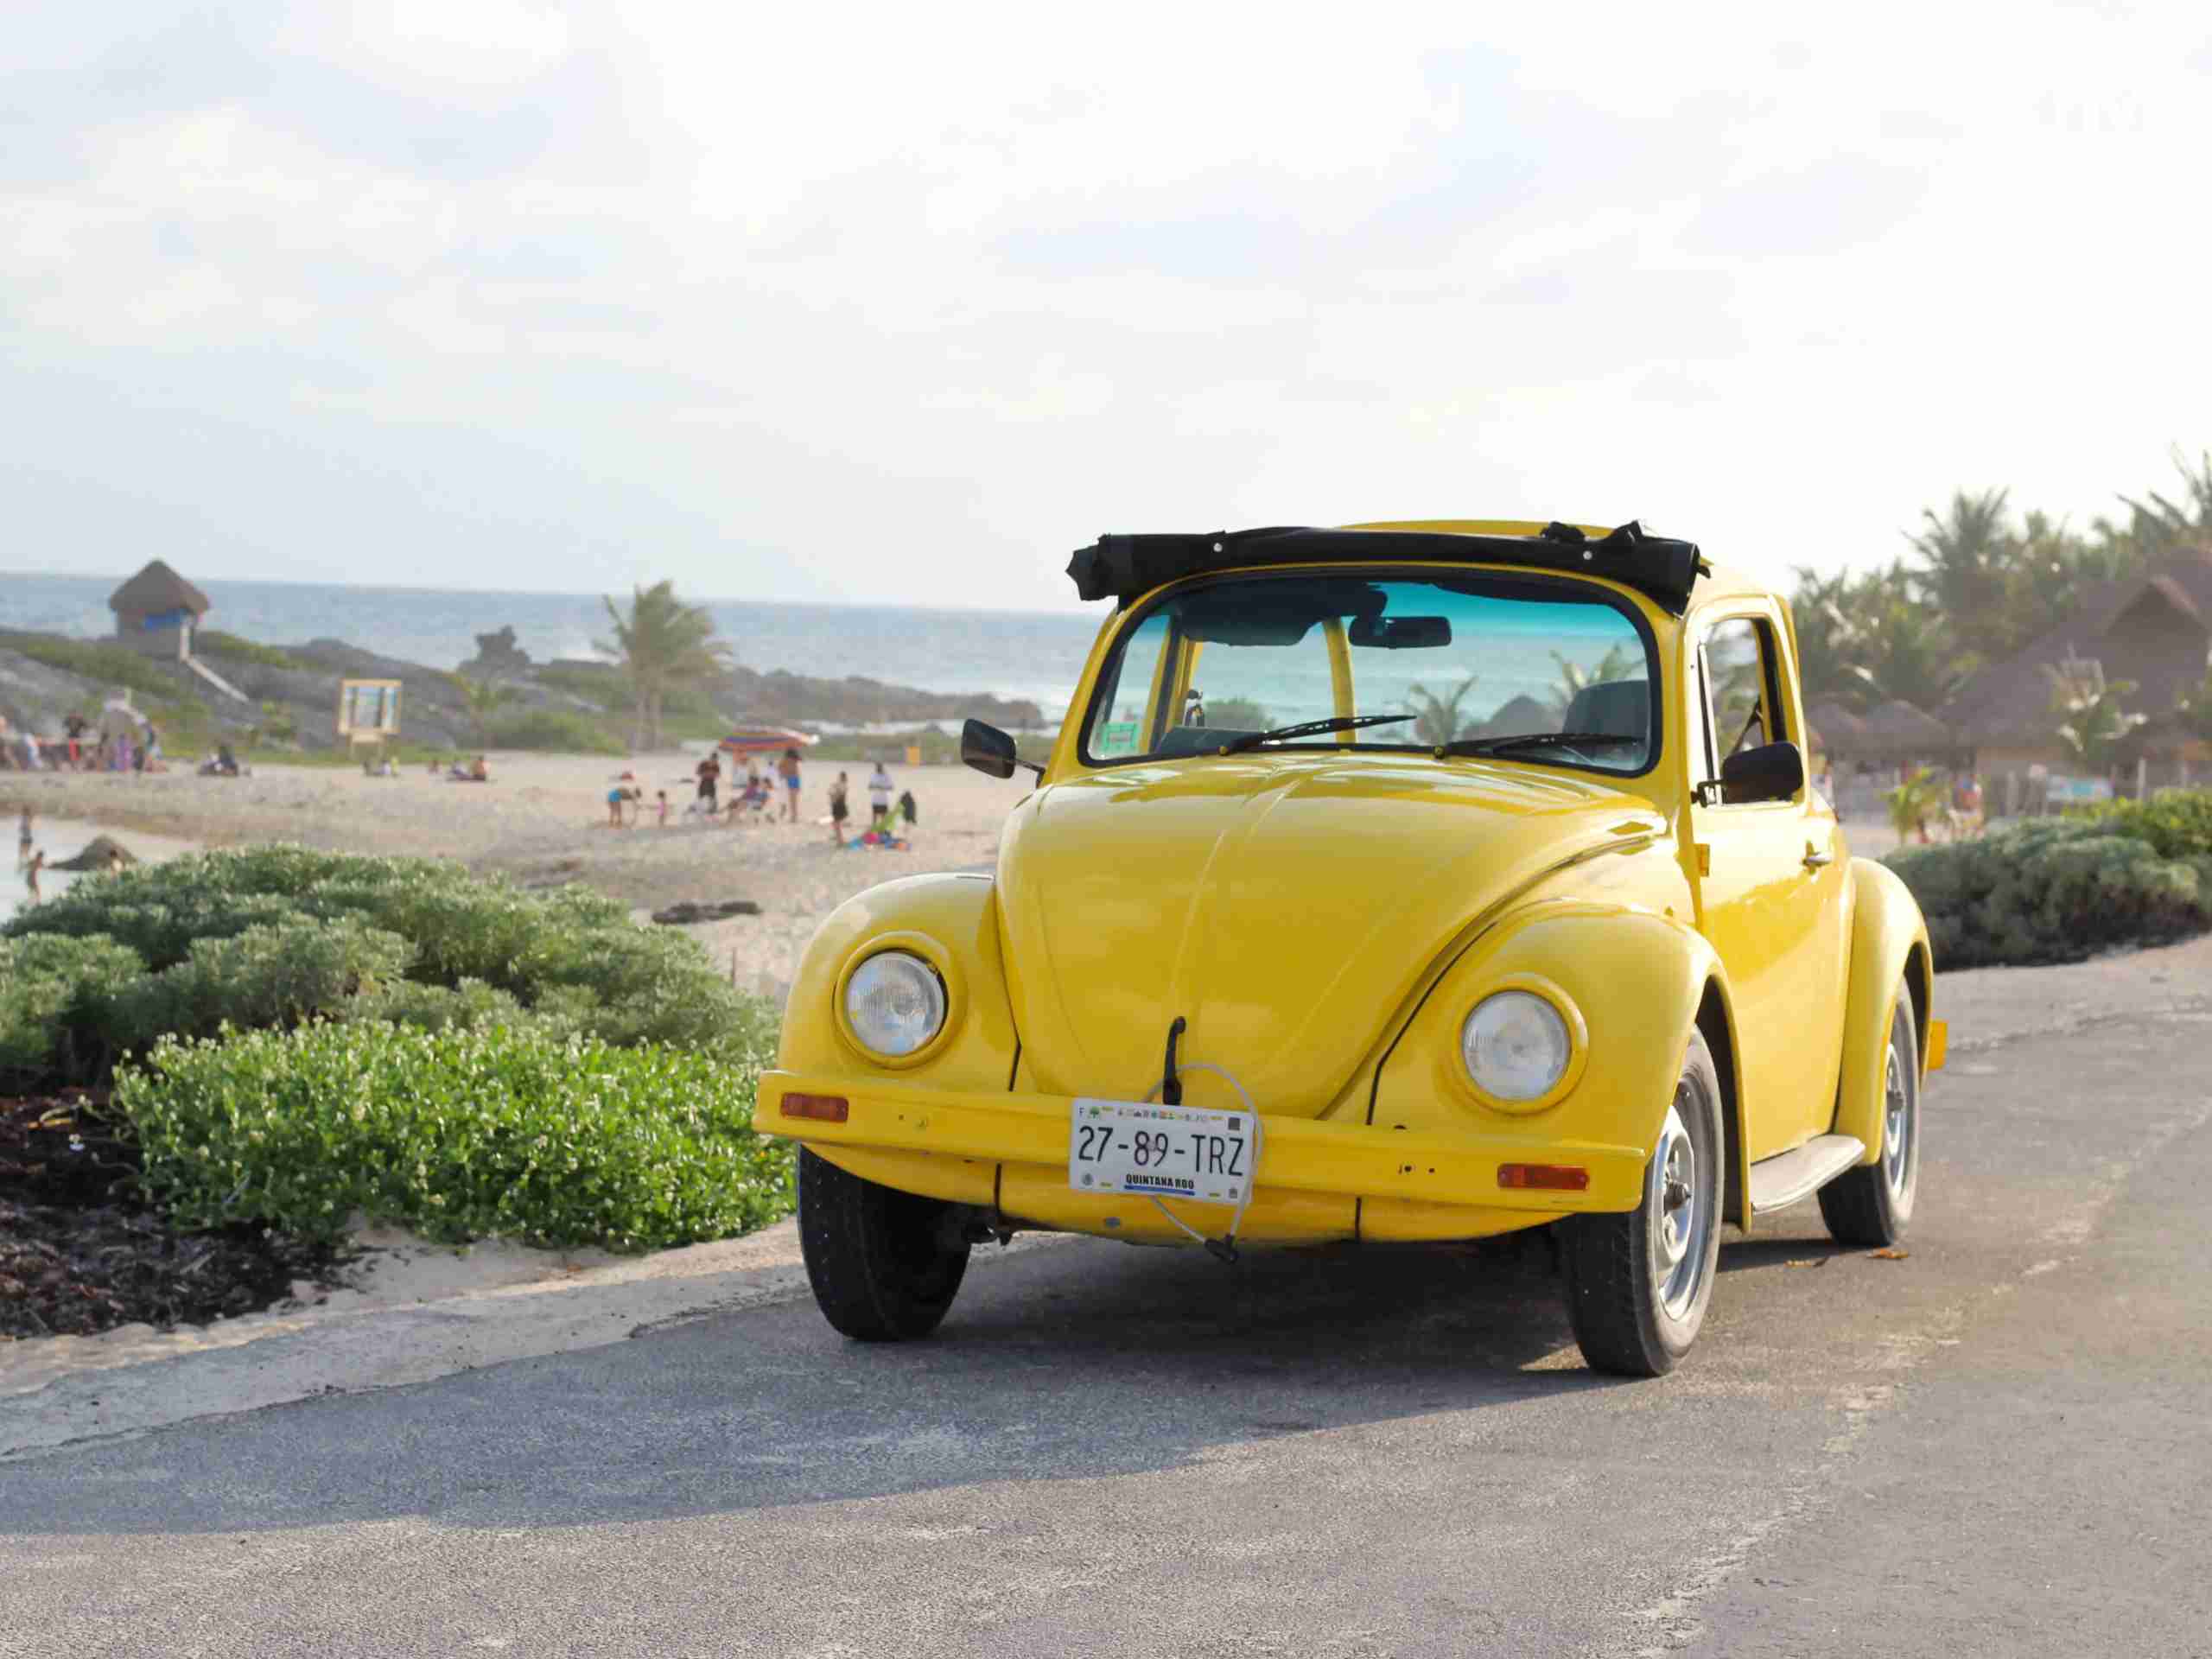 Travel to Cozumel: a tour around the island with an old Beetle - Kim op reis